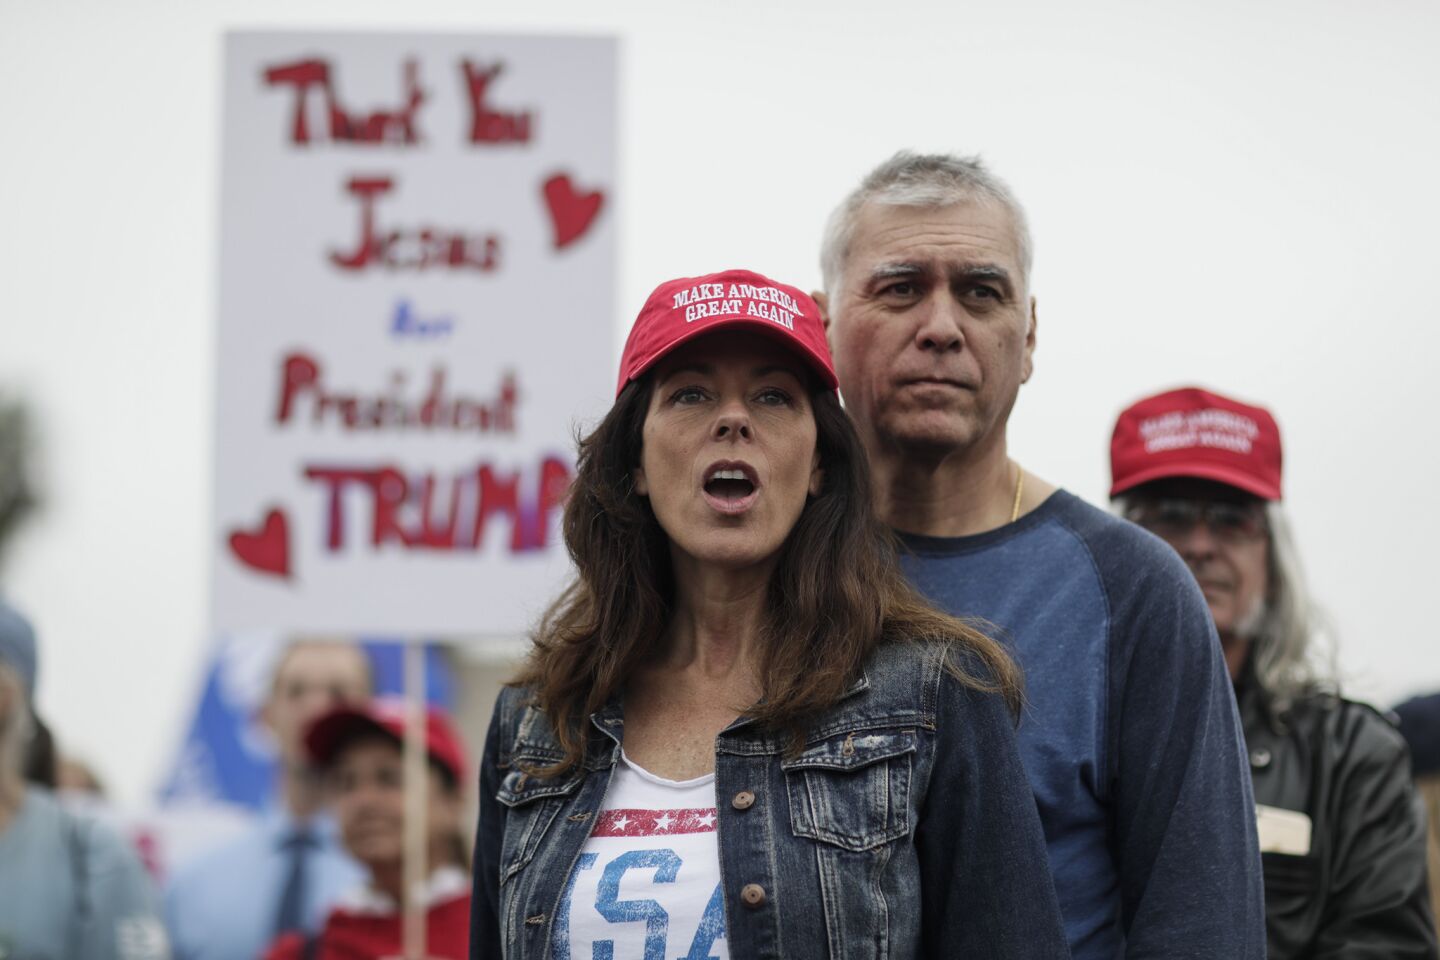 Angela and Tosh Ervin of Oceanside join supporters of President Trump at a rally near the border in San Diego.